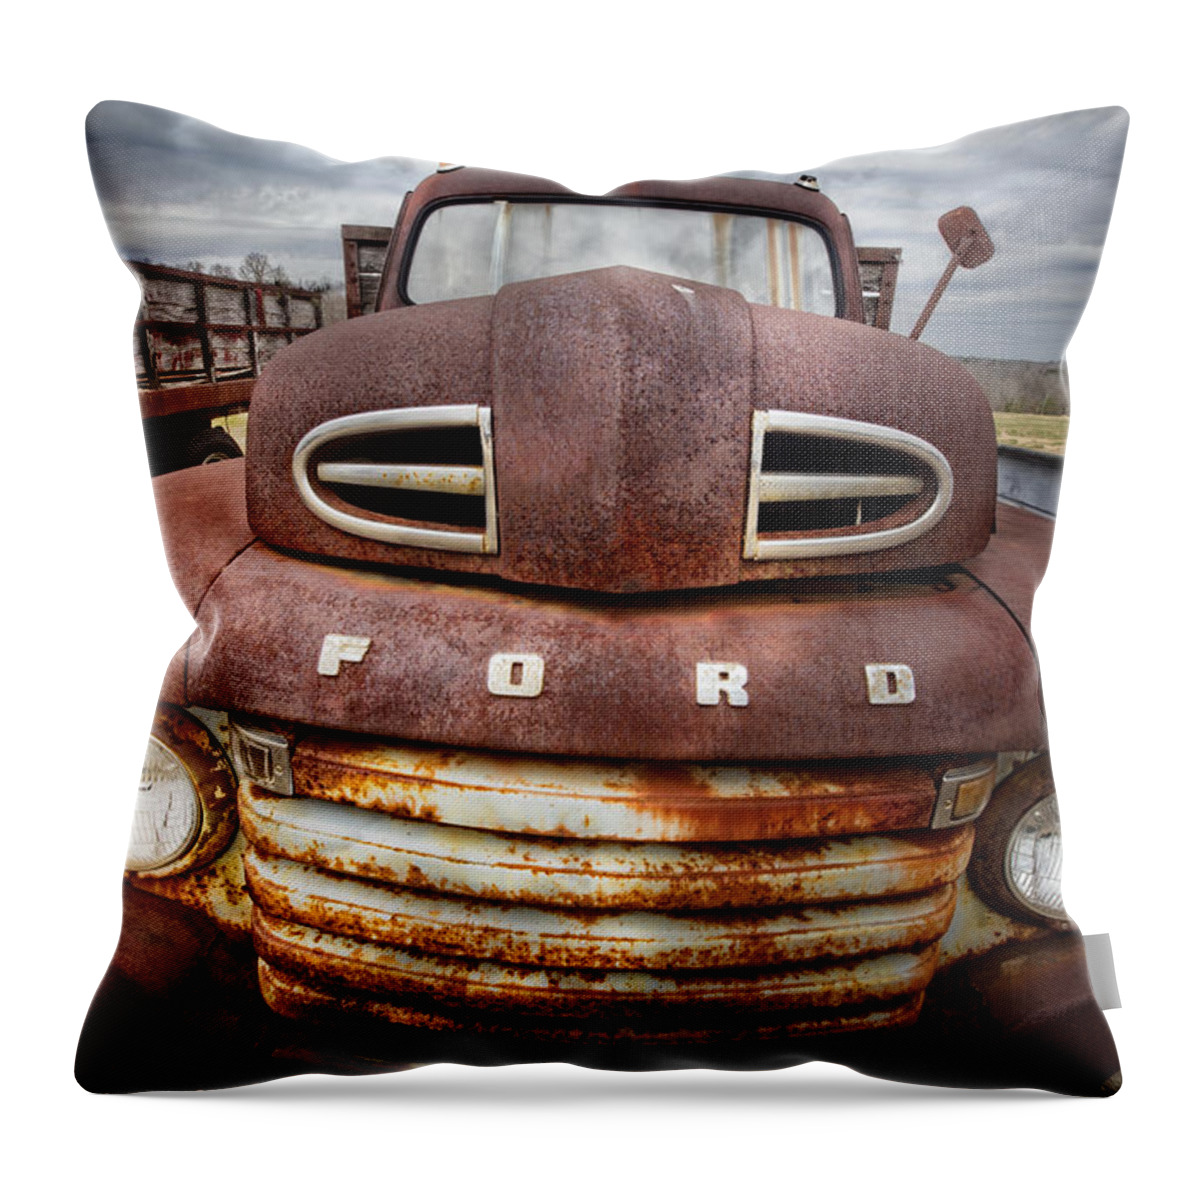 Appalachia Throw Pillow featuring the photograph Happy Ford by Debra and Dave Vanderlaan